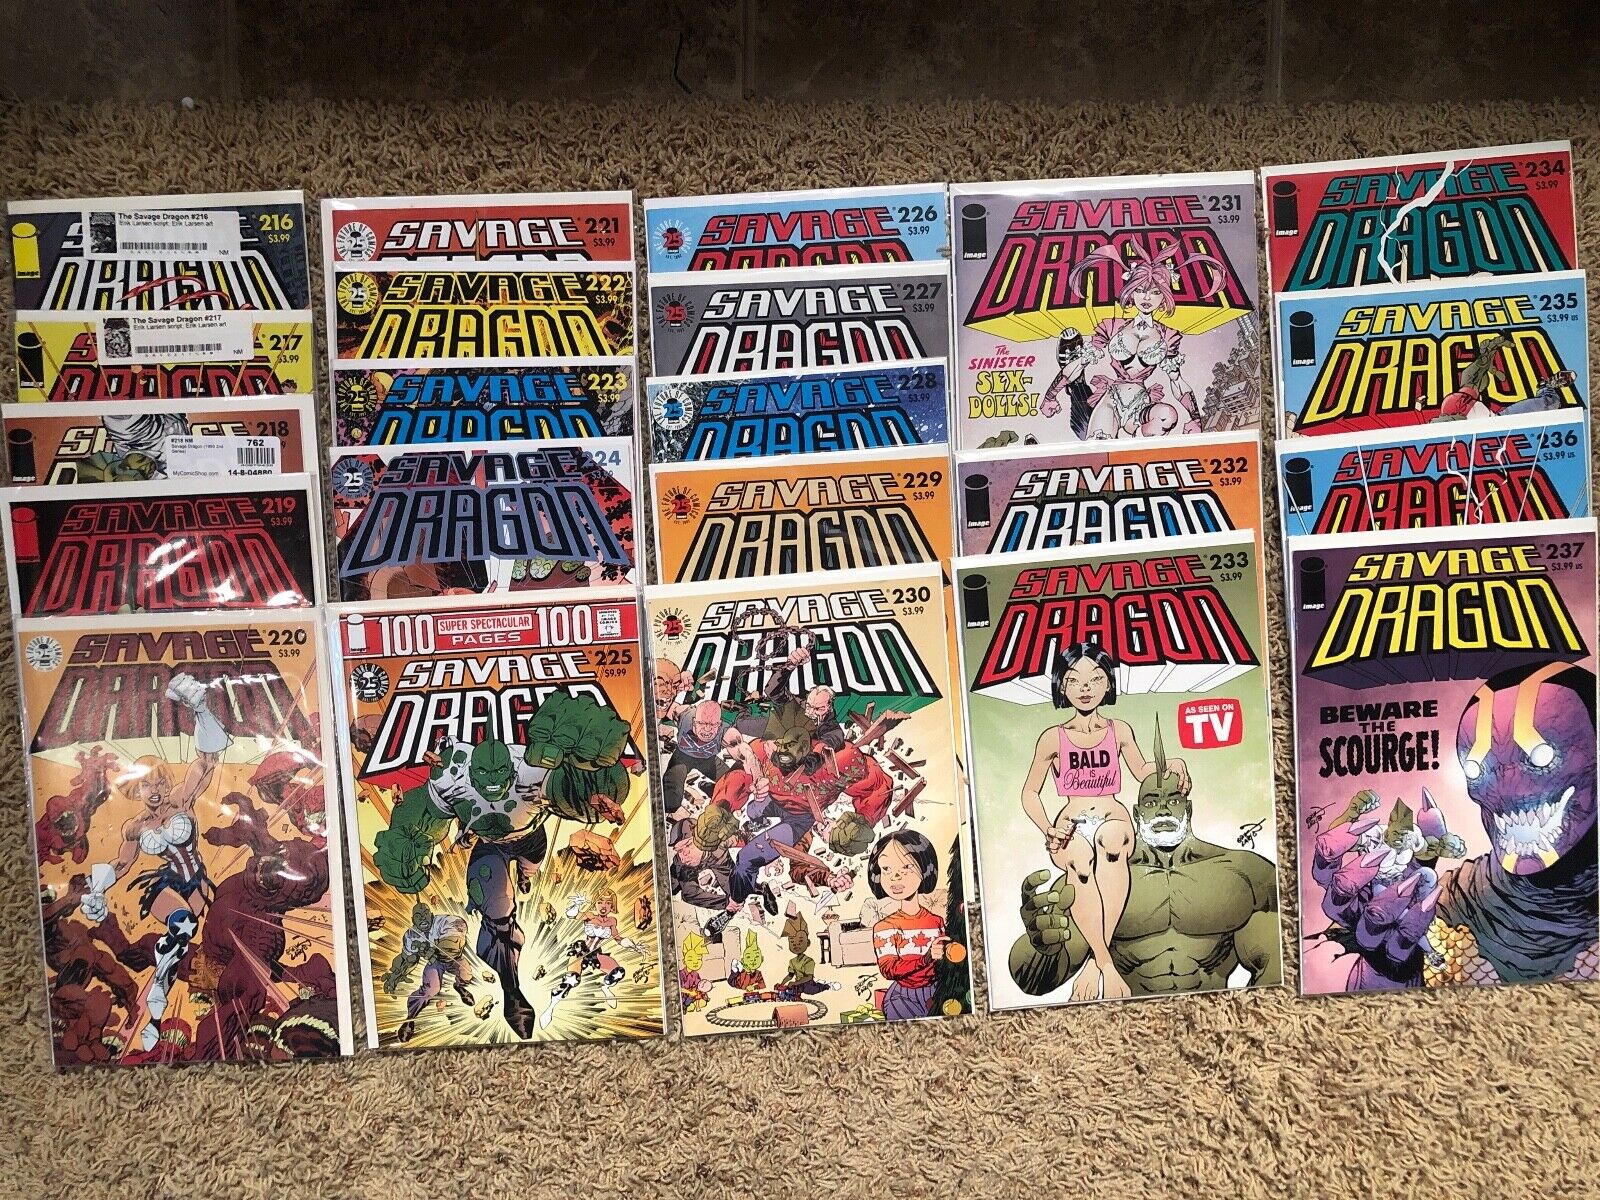 Savage Dragon #s 1 - 237 complete collection ; lot includes rare issues & extras